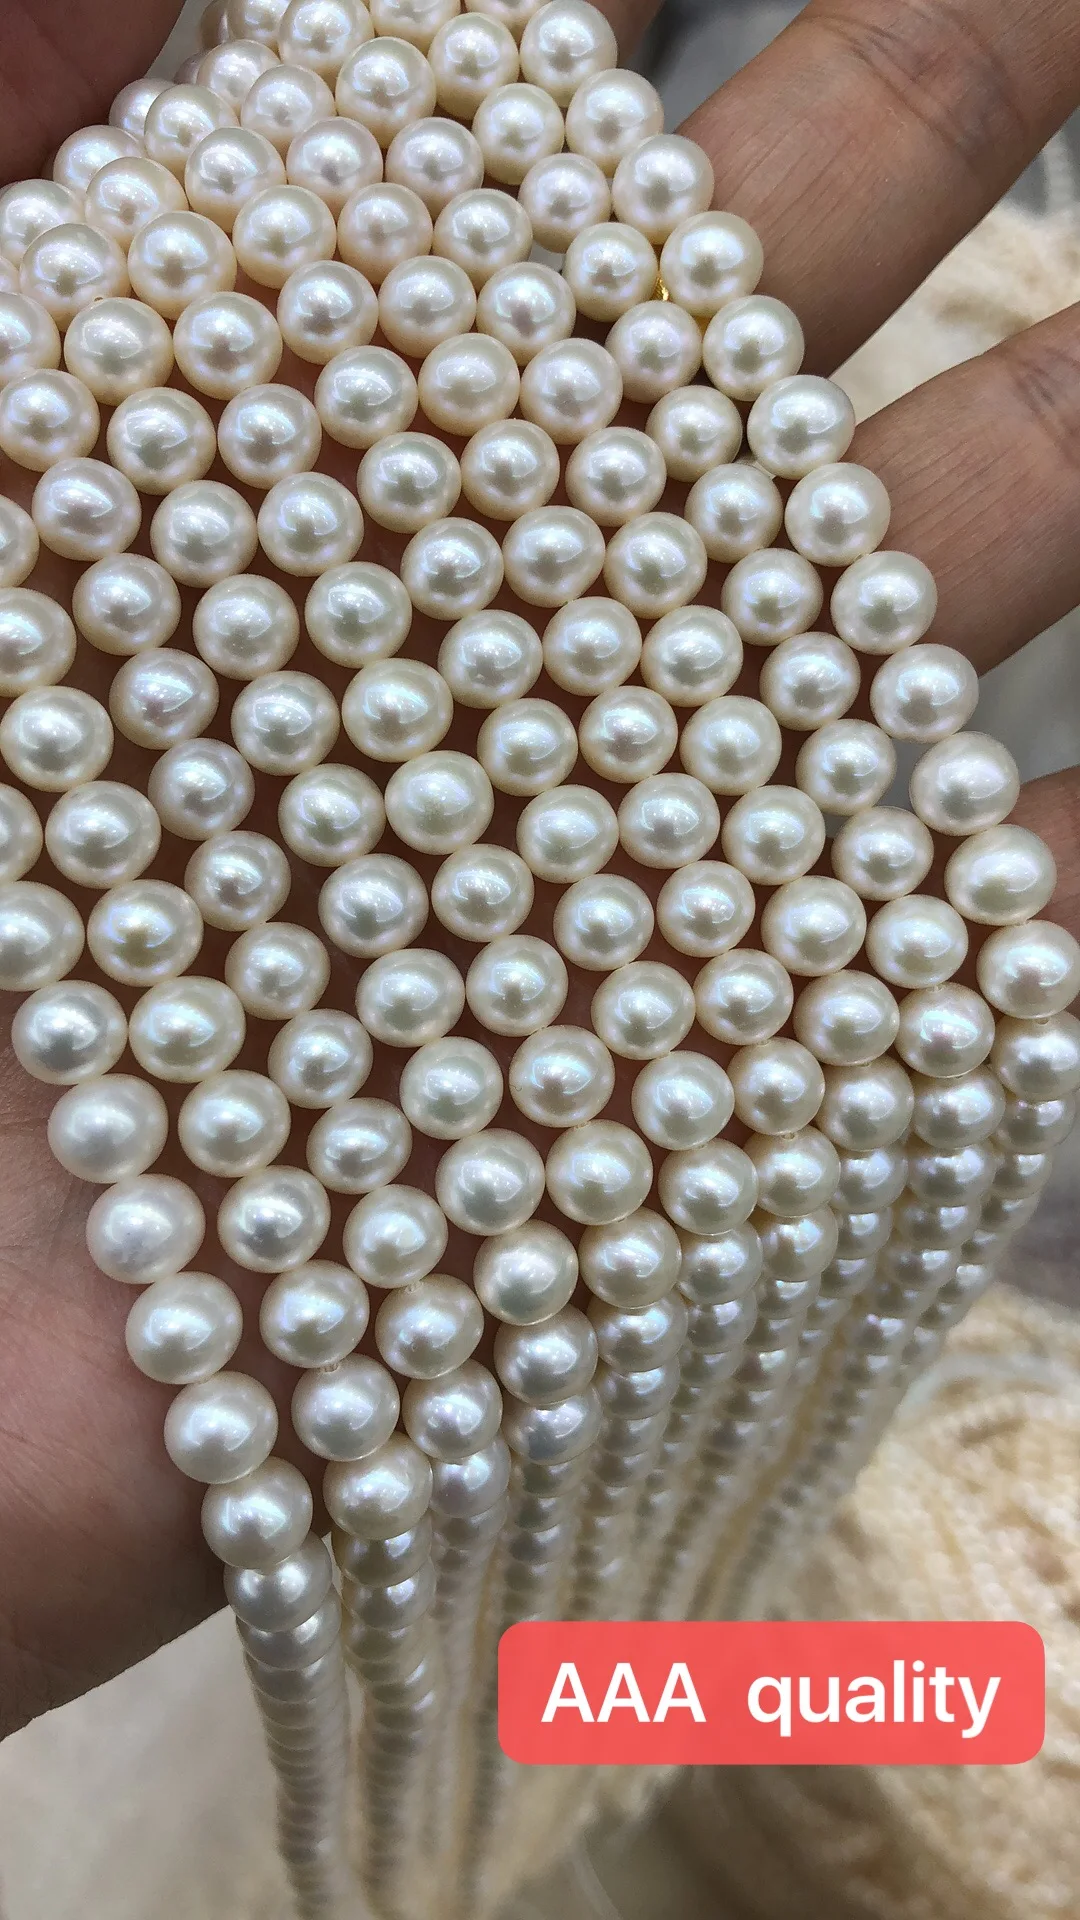 Hot size 3-8mm Natural Pearl Loose Beads 3a high Quality Freshwater Pearl Strand for Woman Pearl Jewelry Necklace DIY